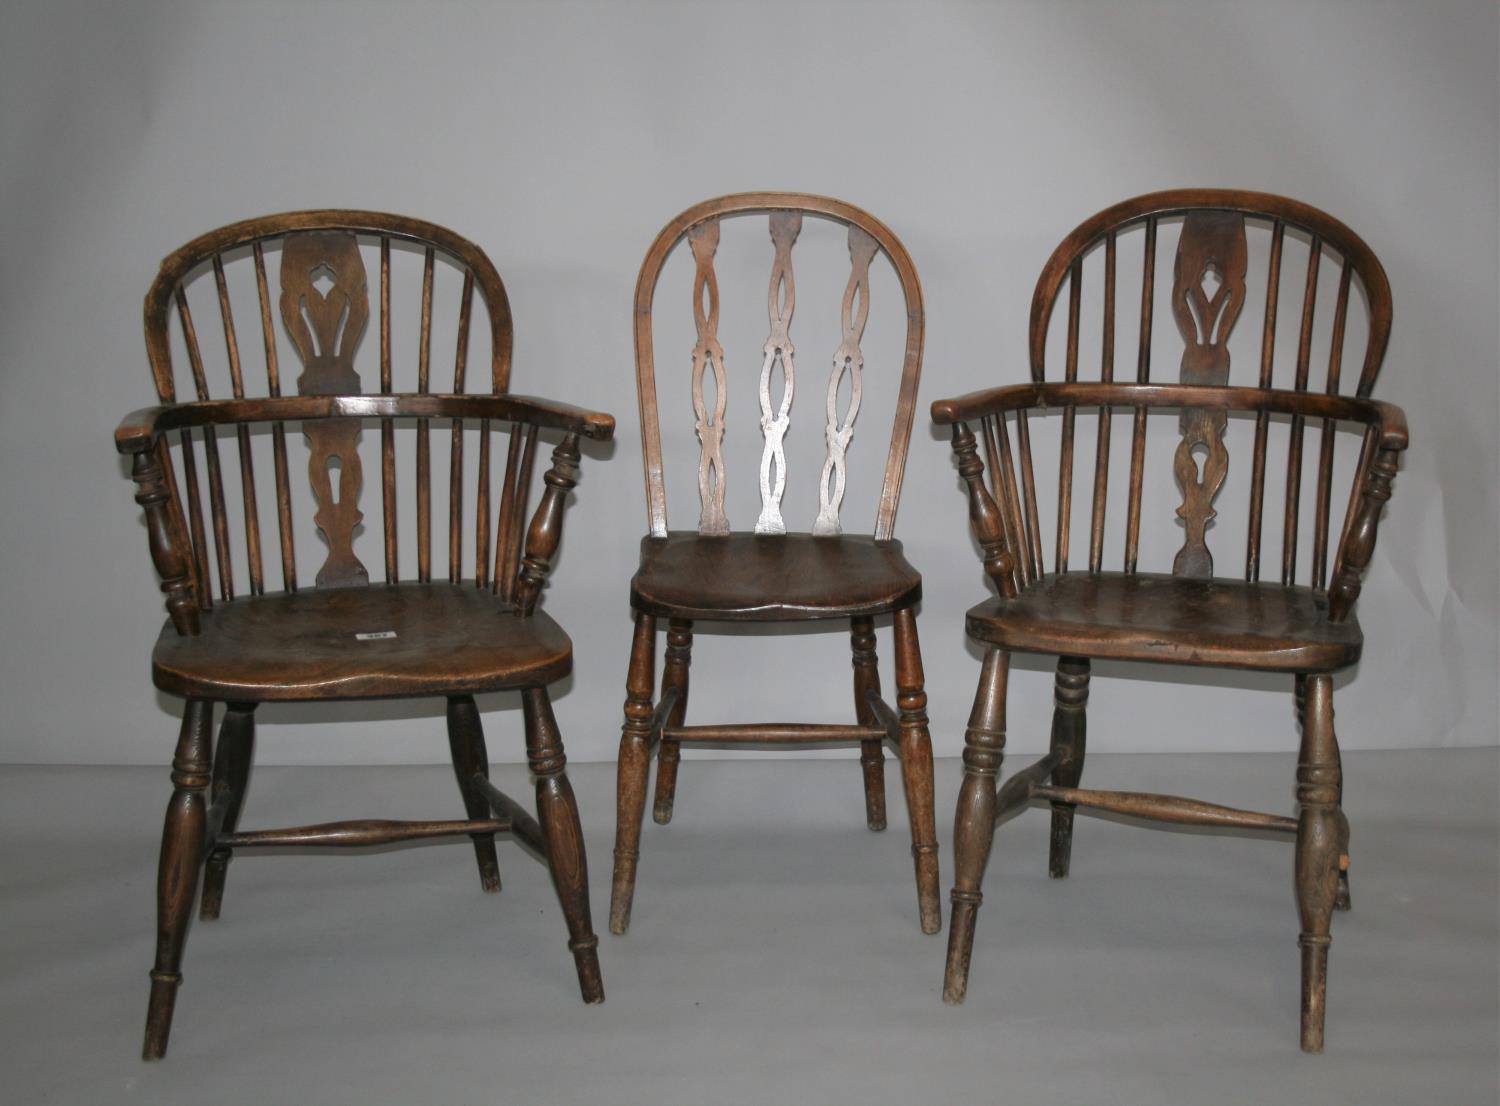 Two 19th Century Windsor arm chairs and other chair. 55W x 90H x 50